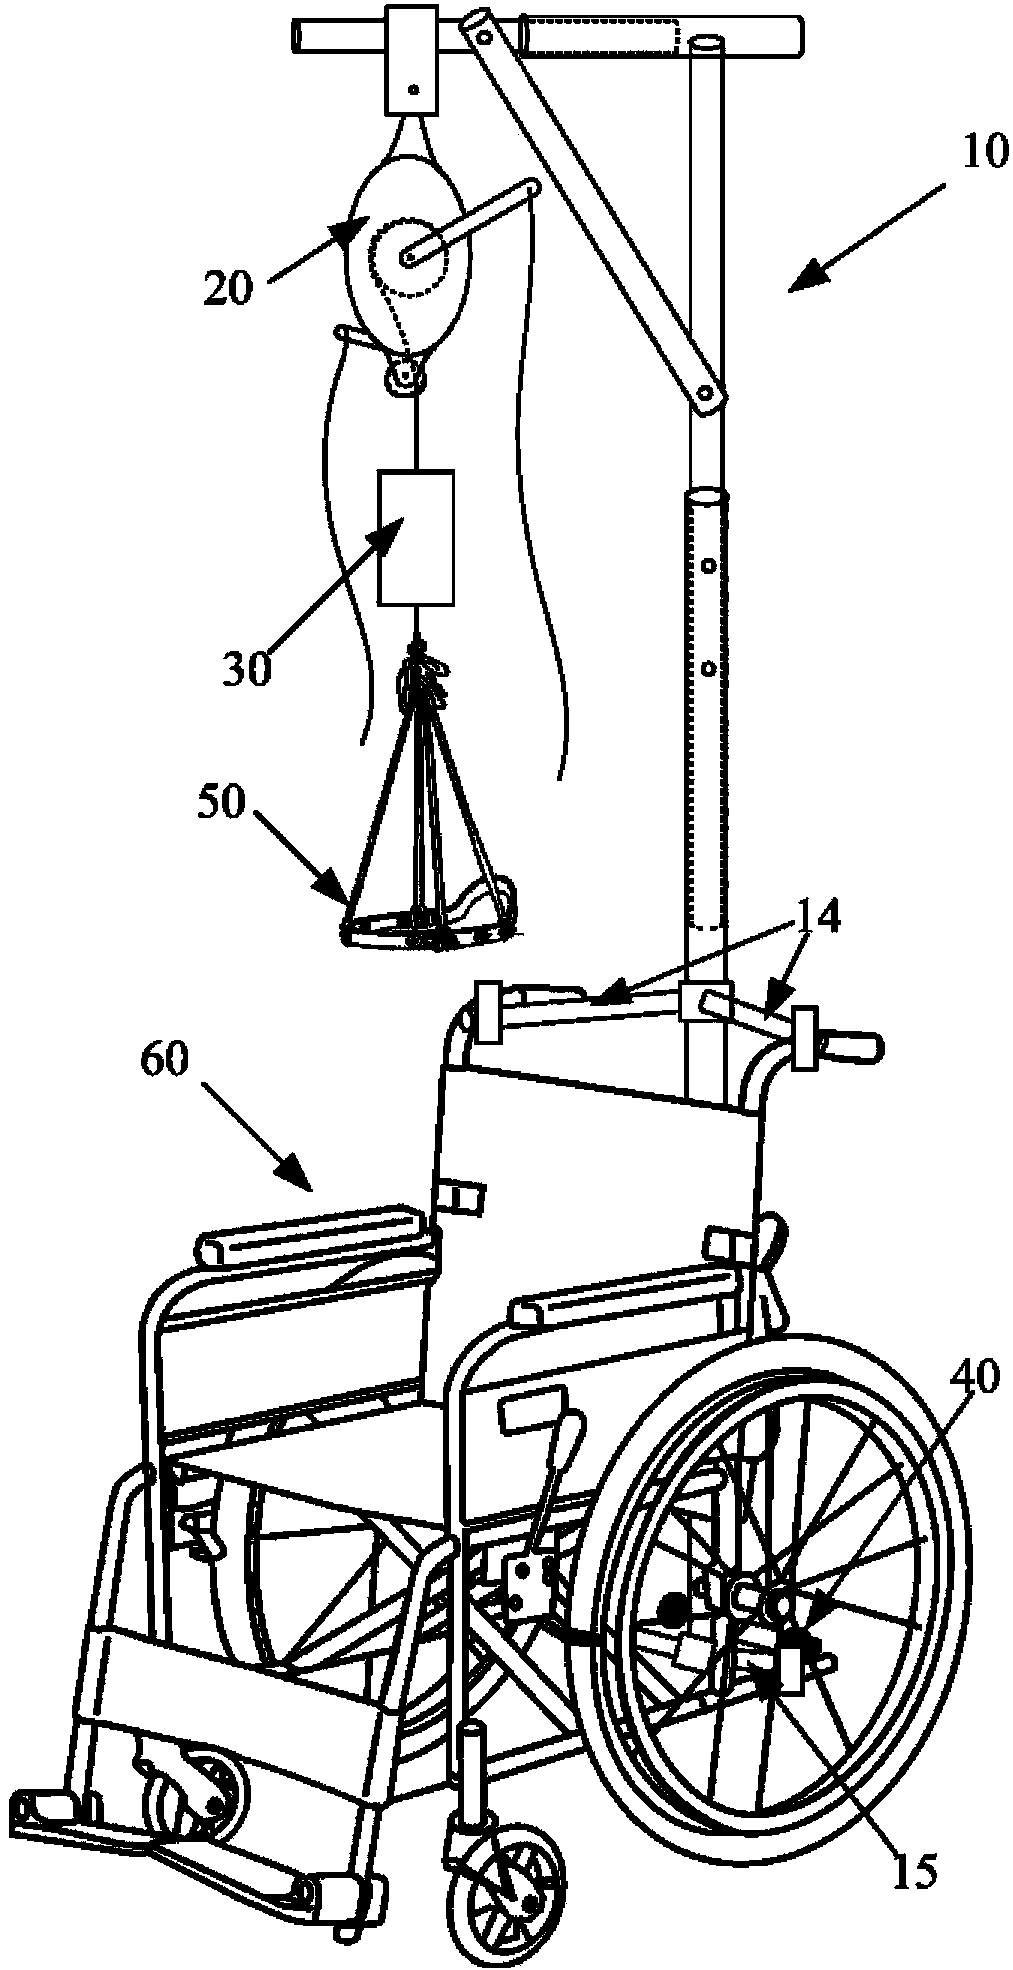 Spinal deformity sitting-position traction device without counter weight and with traction force visualized